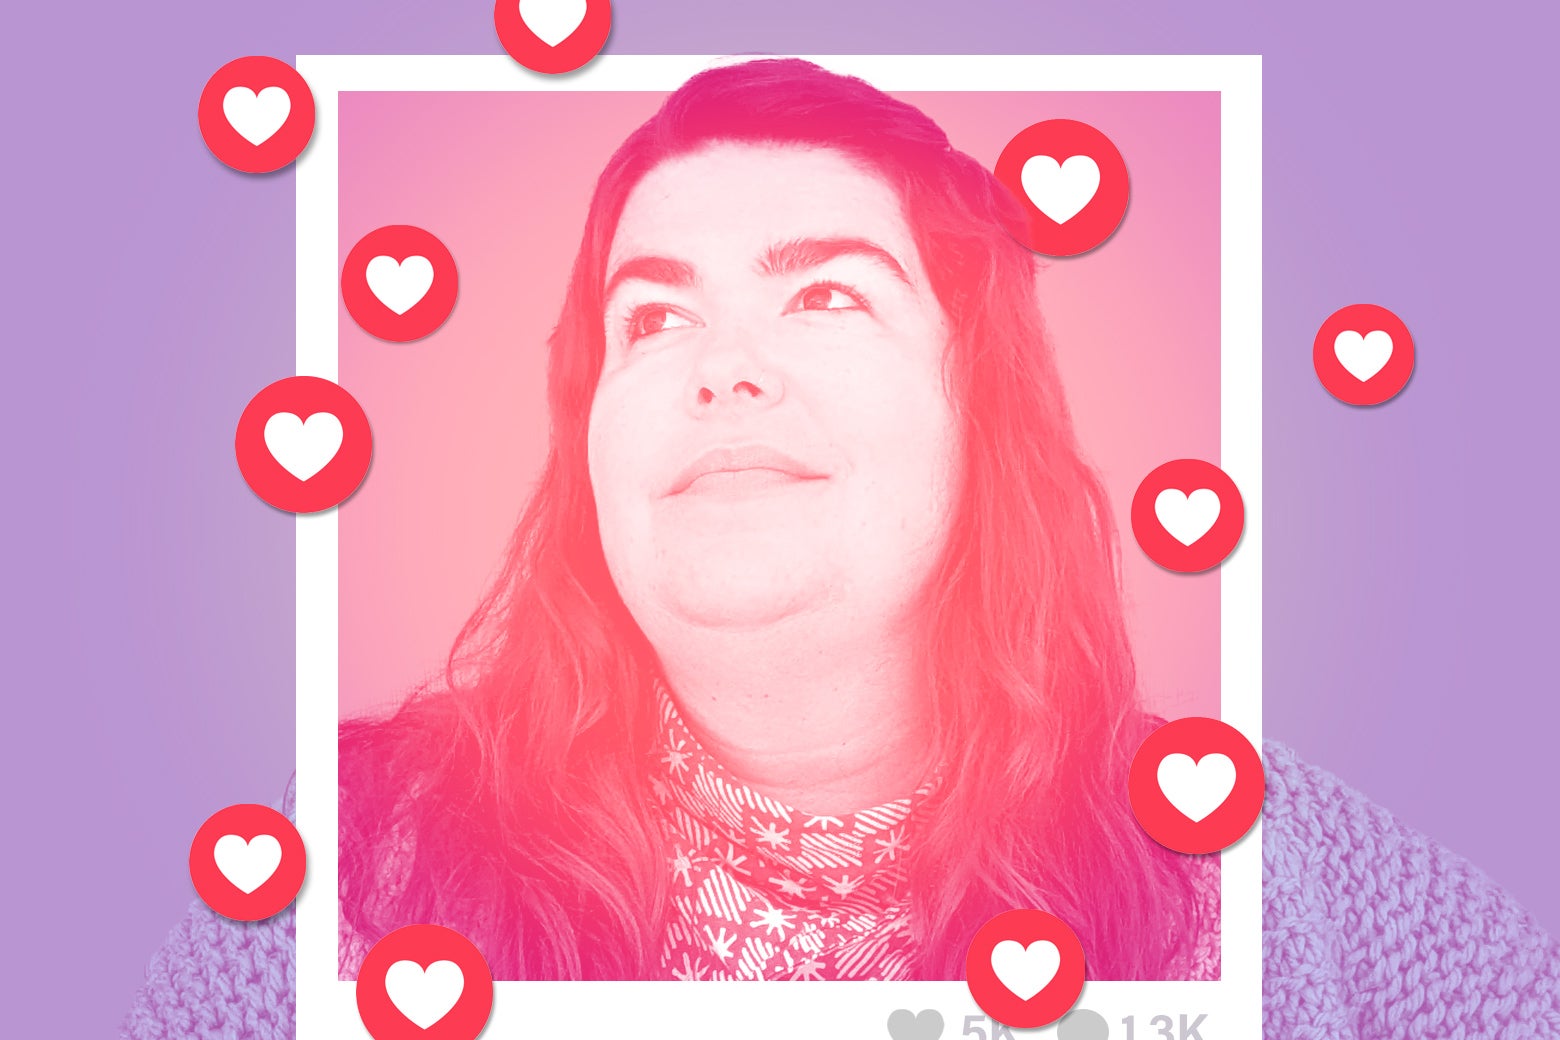 Author Elizabeth Endicott is seen looking upward as she's surrounded by Instagram heart likes on a purple background. 